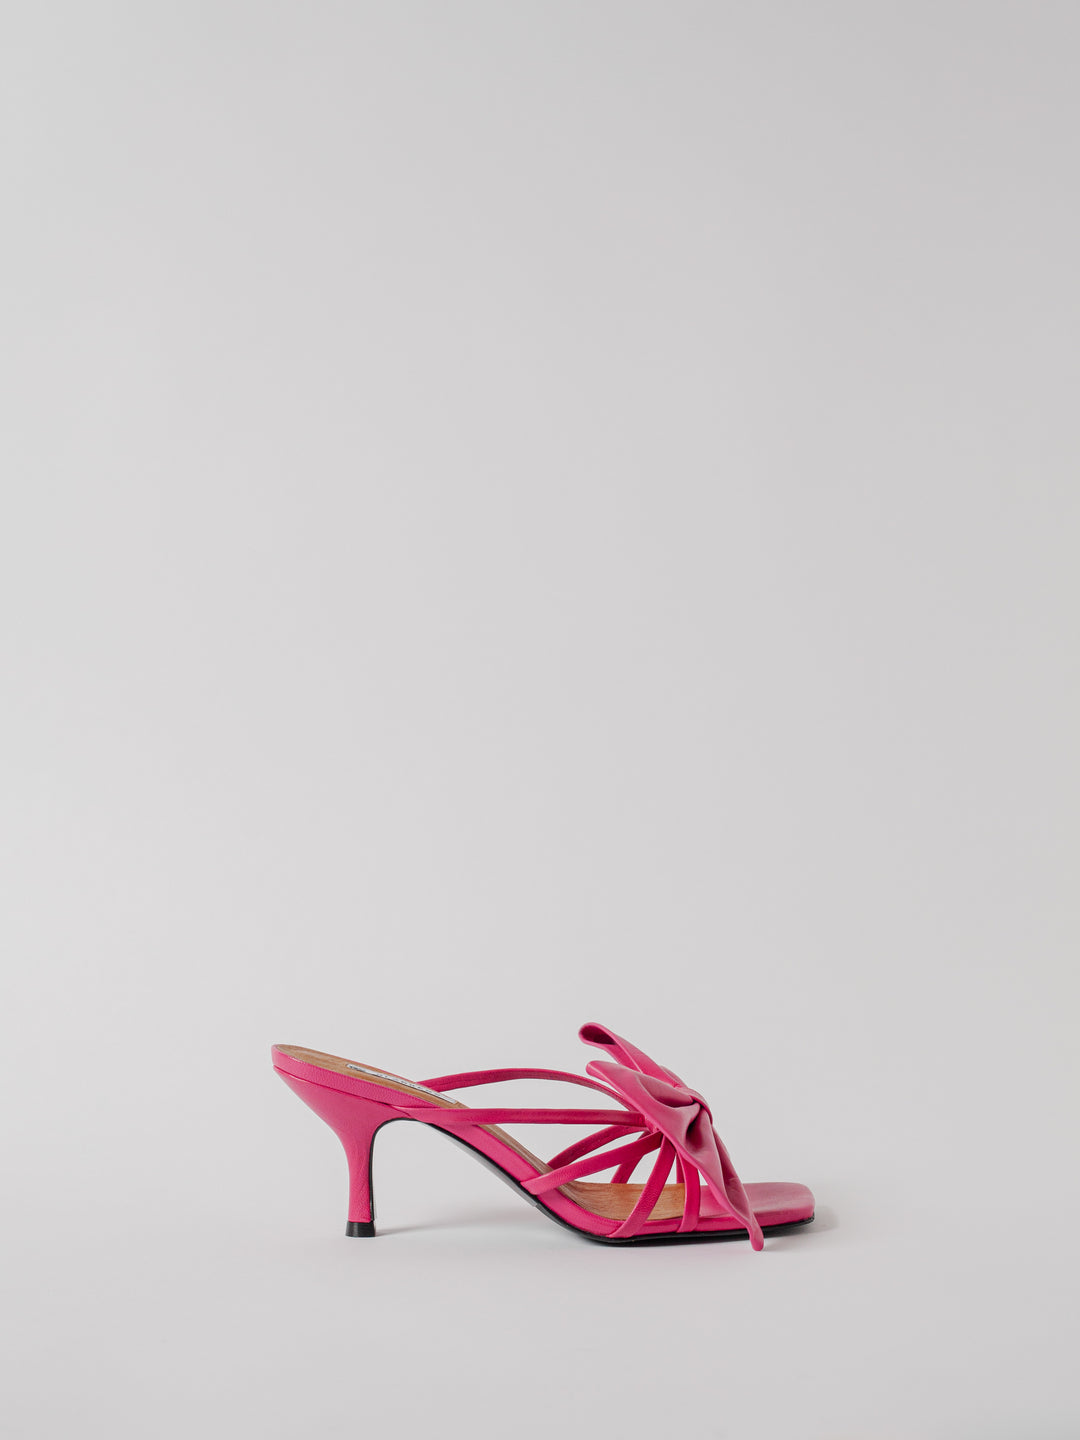 Blankens The Jennie pink bow, pink leather heel sandal, big bow. made in Europe. 